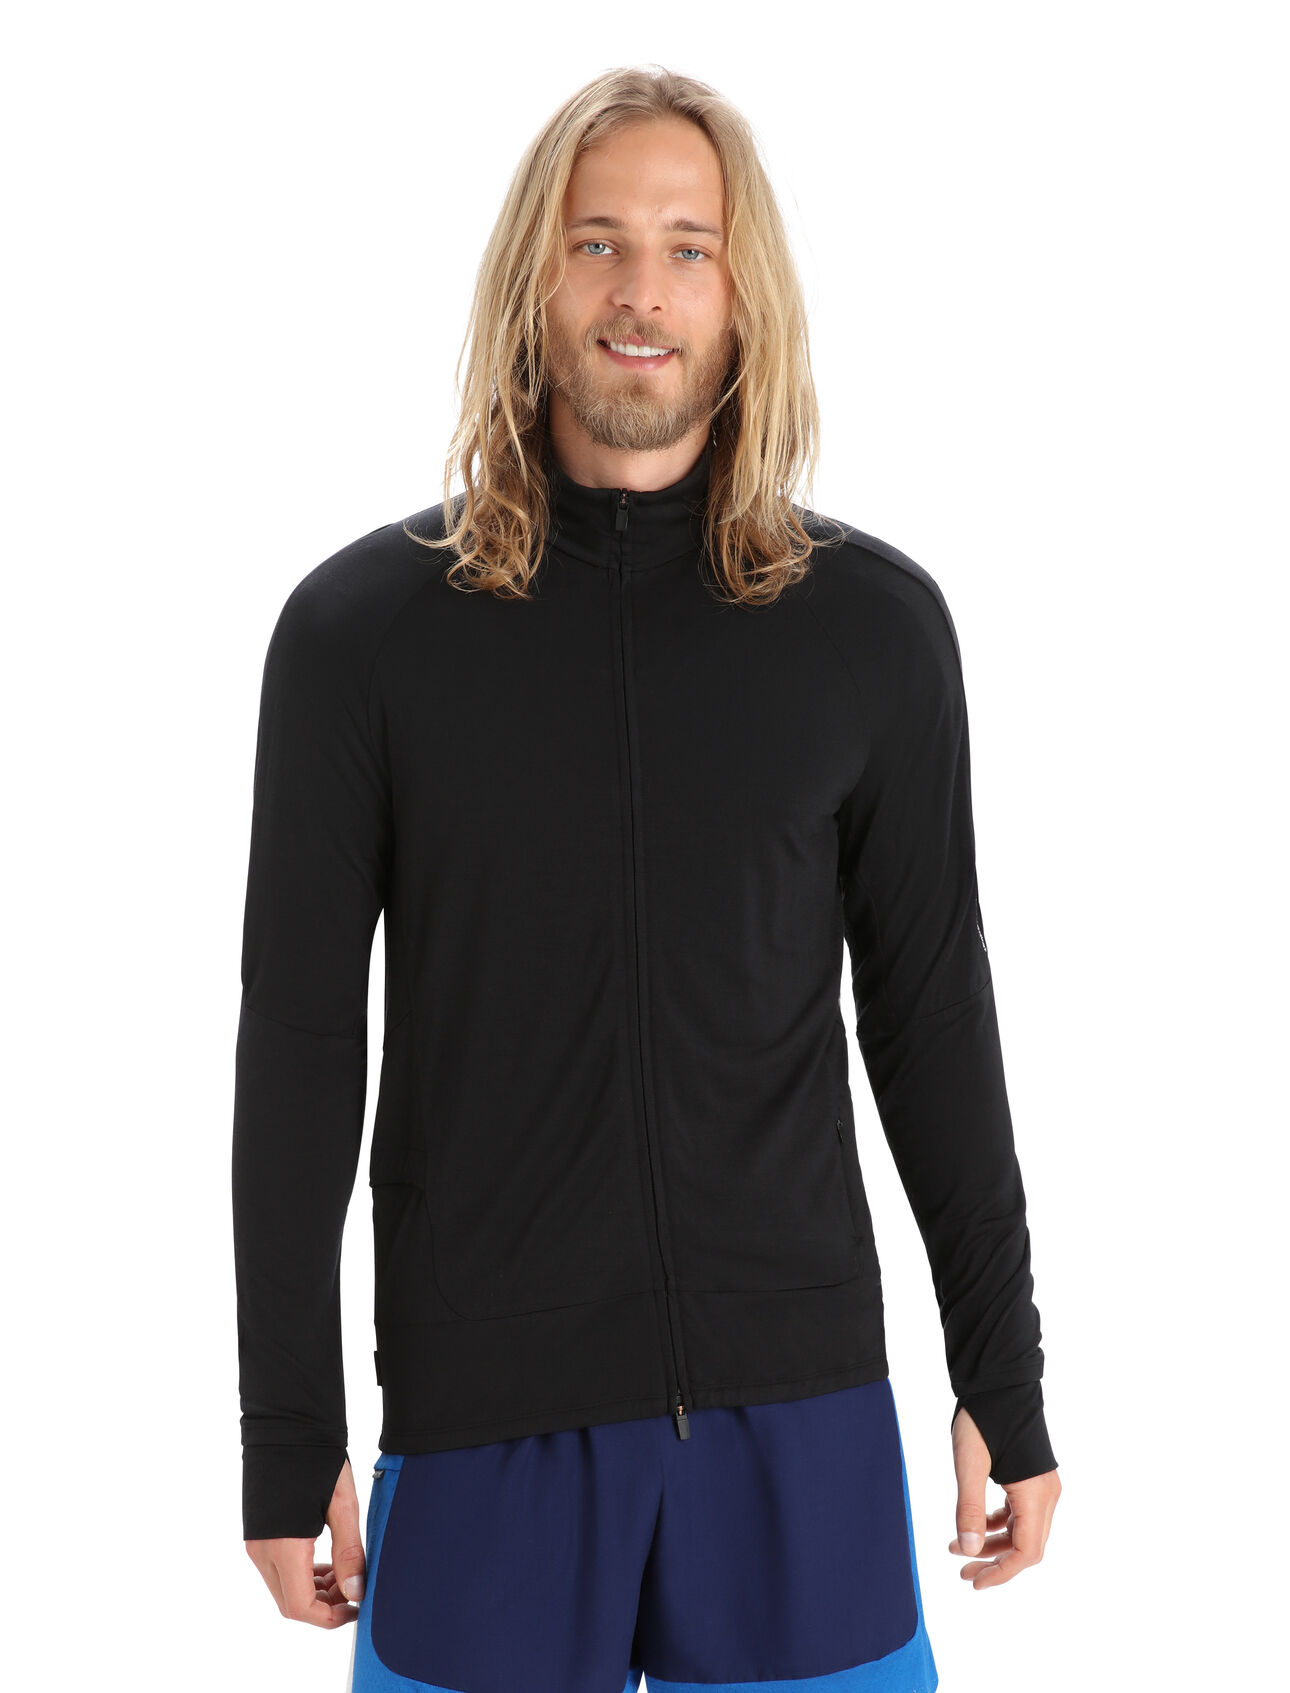 Mens ZoneKnit™ Merino Long Sleeve Zip Top A lightweight midlayer designed to balance warmth and breathability while running, biking or moving fast in the mountains, the ZoneKnit™ Long Sleeve Zip combines our Cool-Lite™ jersey fabric with strategic panels of eyelet mesh for enhanced airflow.